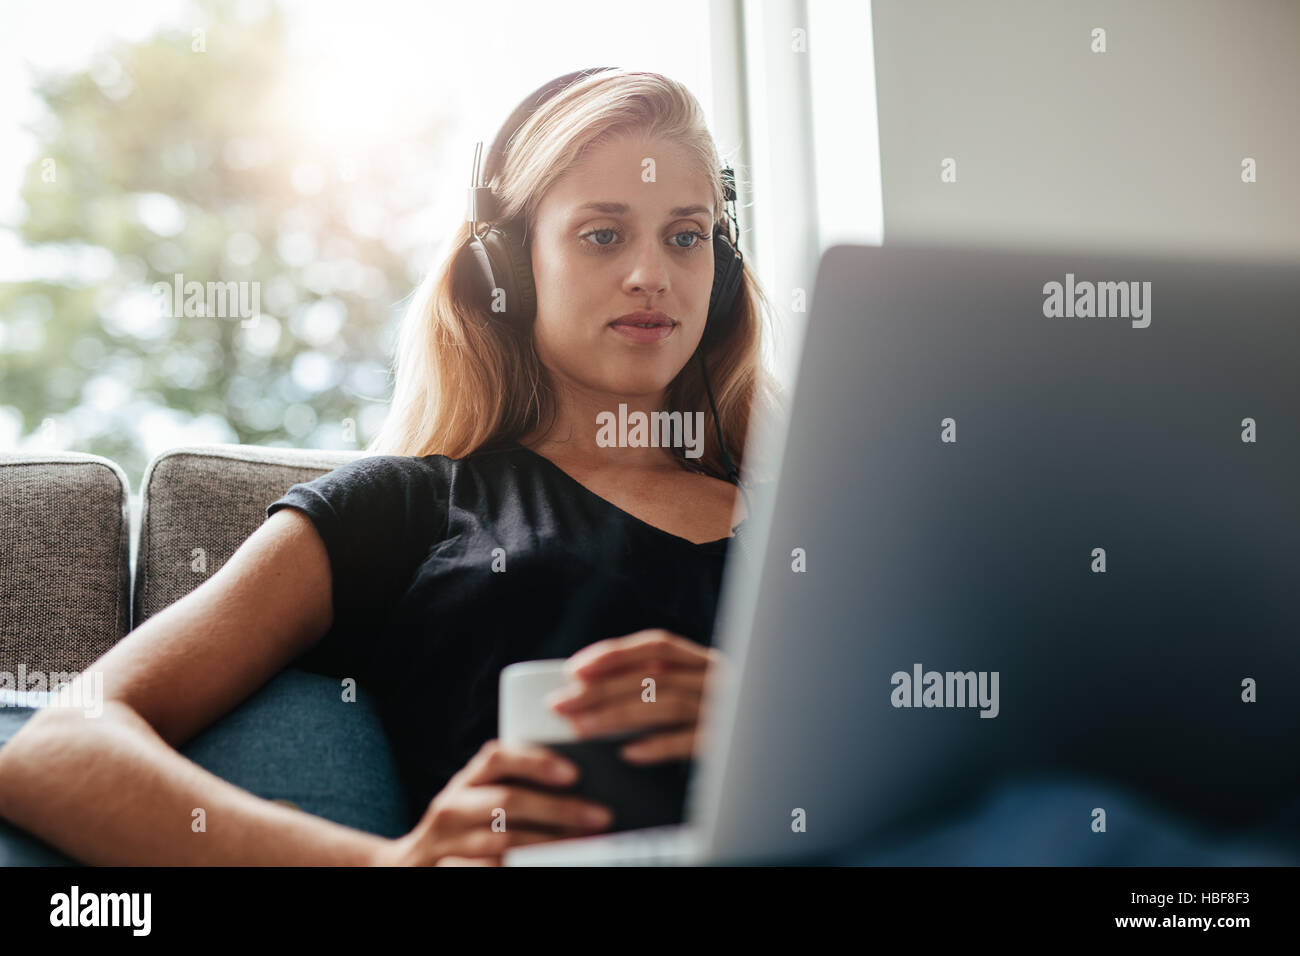 Young woman with headphones looking at laptop. She is sitting on couch in living room at home. Stock Photo